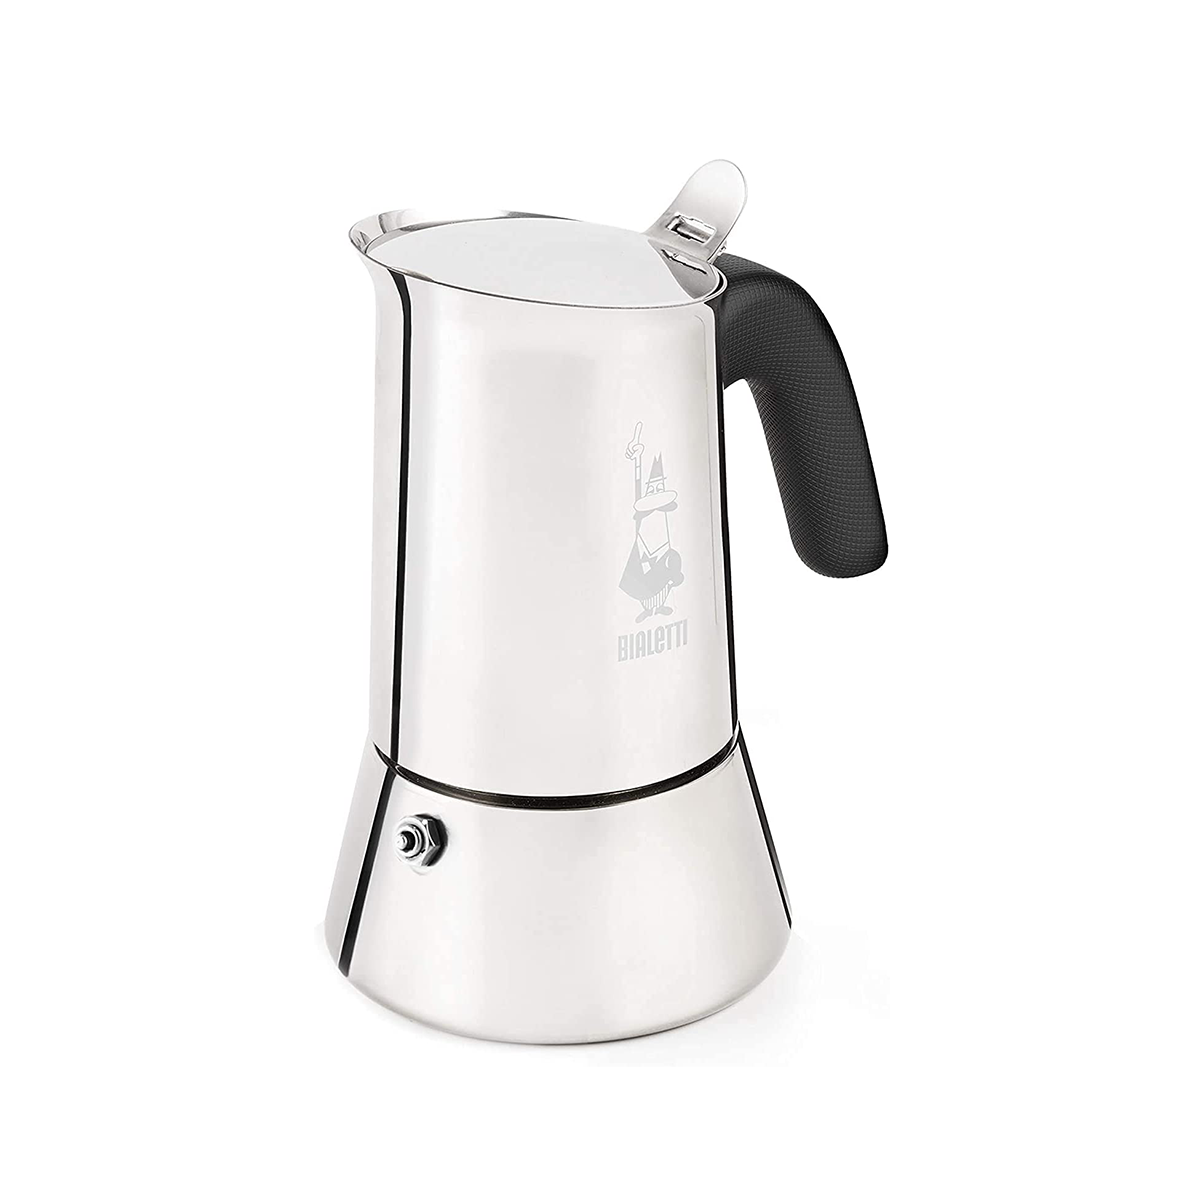 Looking for a Bialetti Venus Induction 'R' Stainless Steel Stovetop Coffee  Maker (6 Cup) - Silver Bialetti to purchase? Be quick